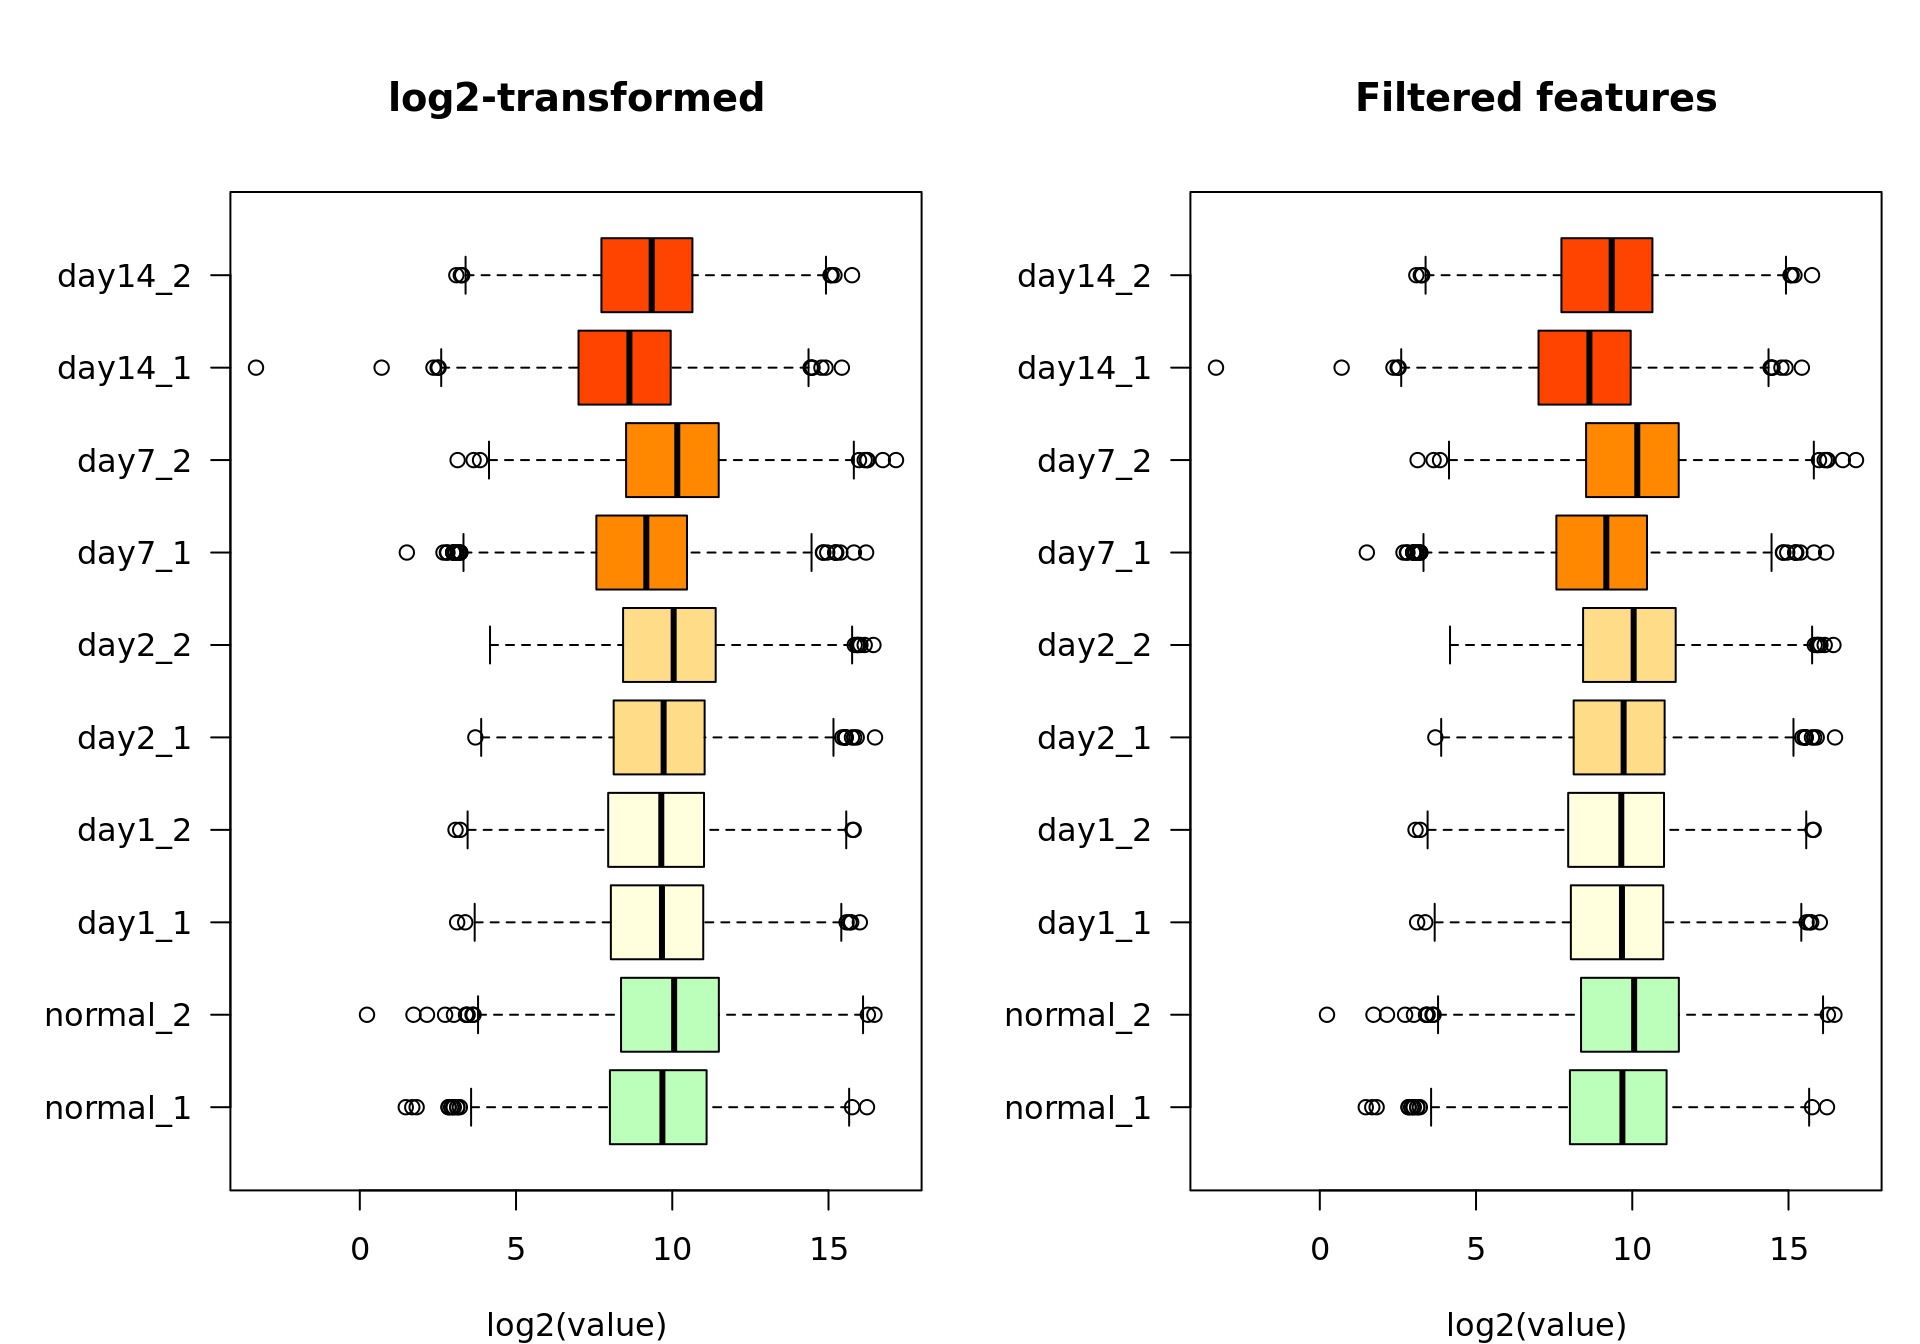 Box plot of the log2-transformed values before (left) and after (right)  feature filtering. 